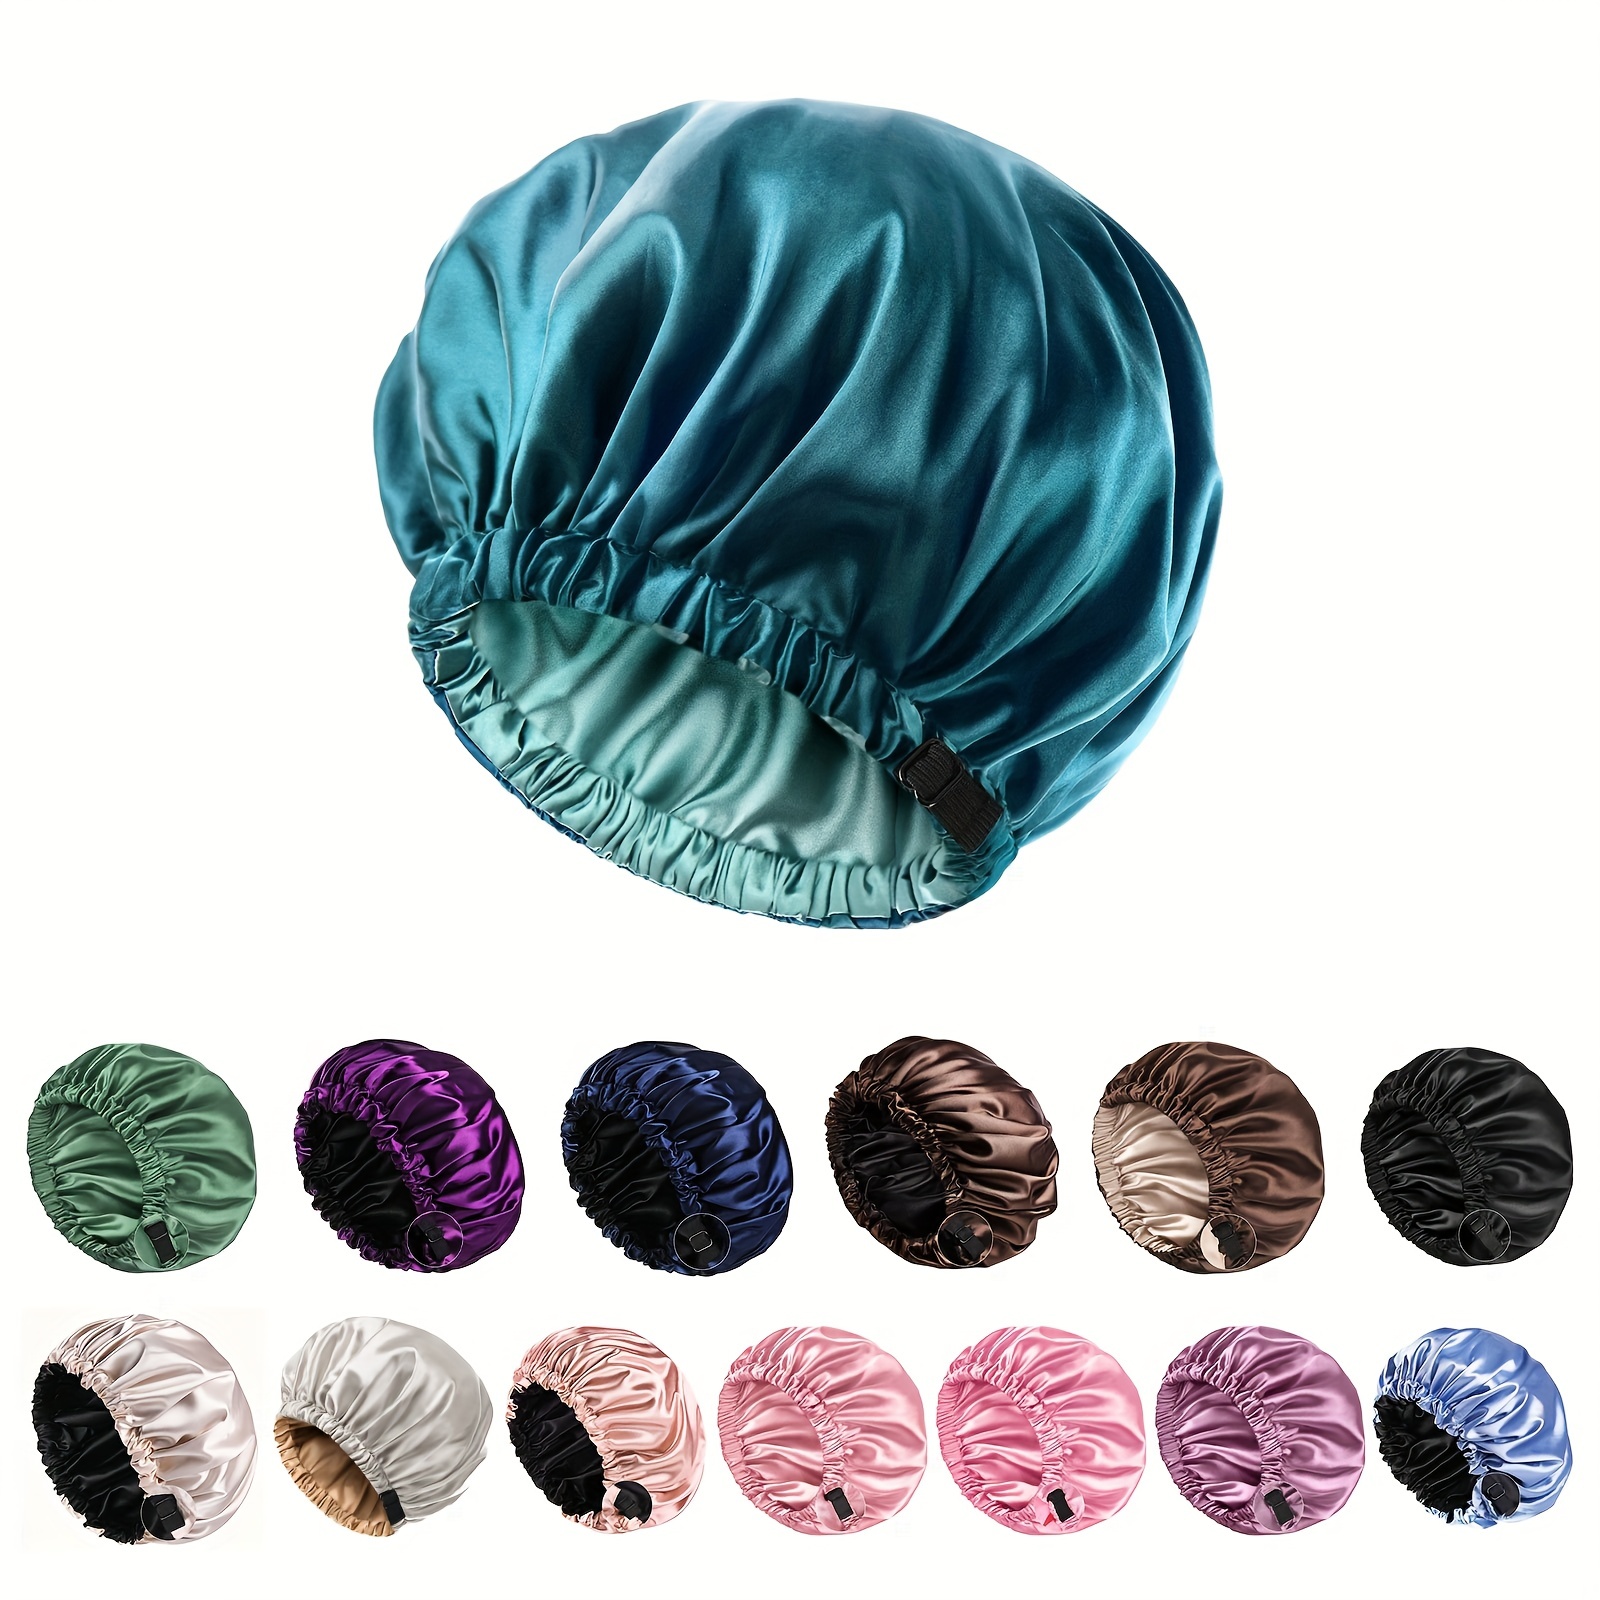 4pcs Satin Wide Band Bonnet For Mens Womens Sleeping Ideal Choice For Gifts, Shop The Latest Trends